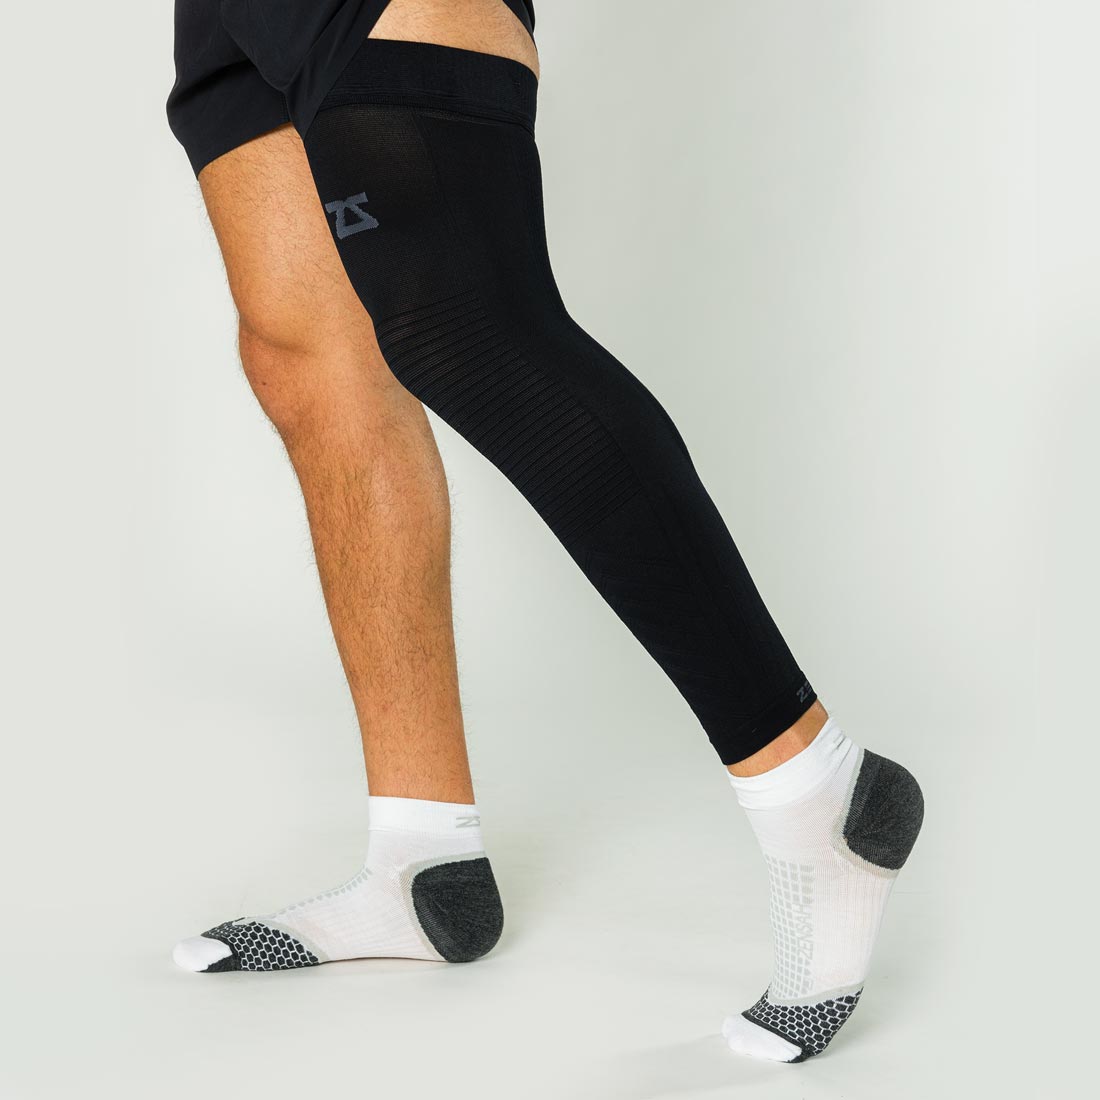 nood Ziektecijfers Productie Full Leg Compression Sleeve - Full Length Compression, Breathable,  Lightweight Support